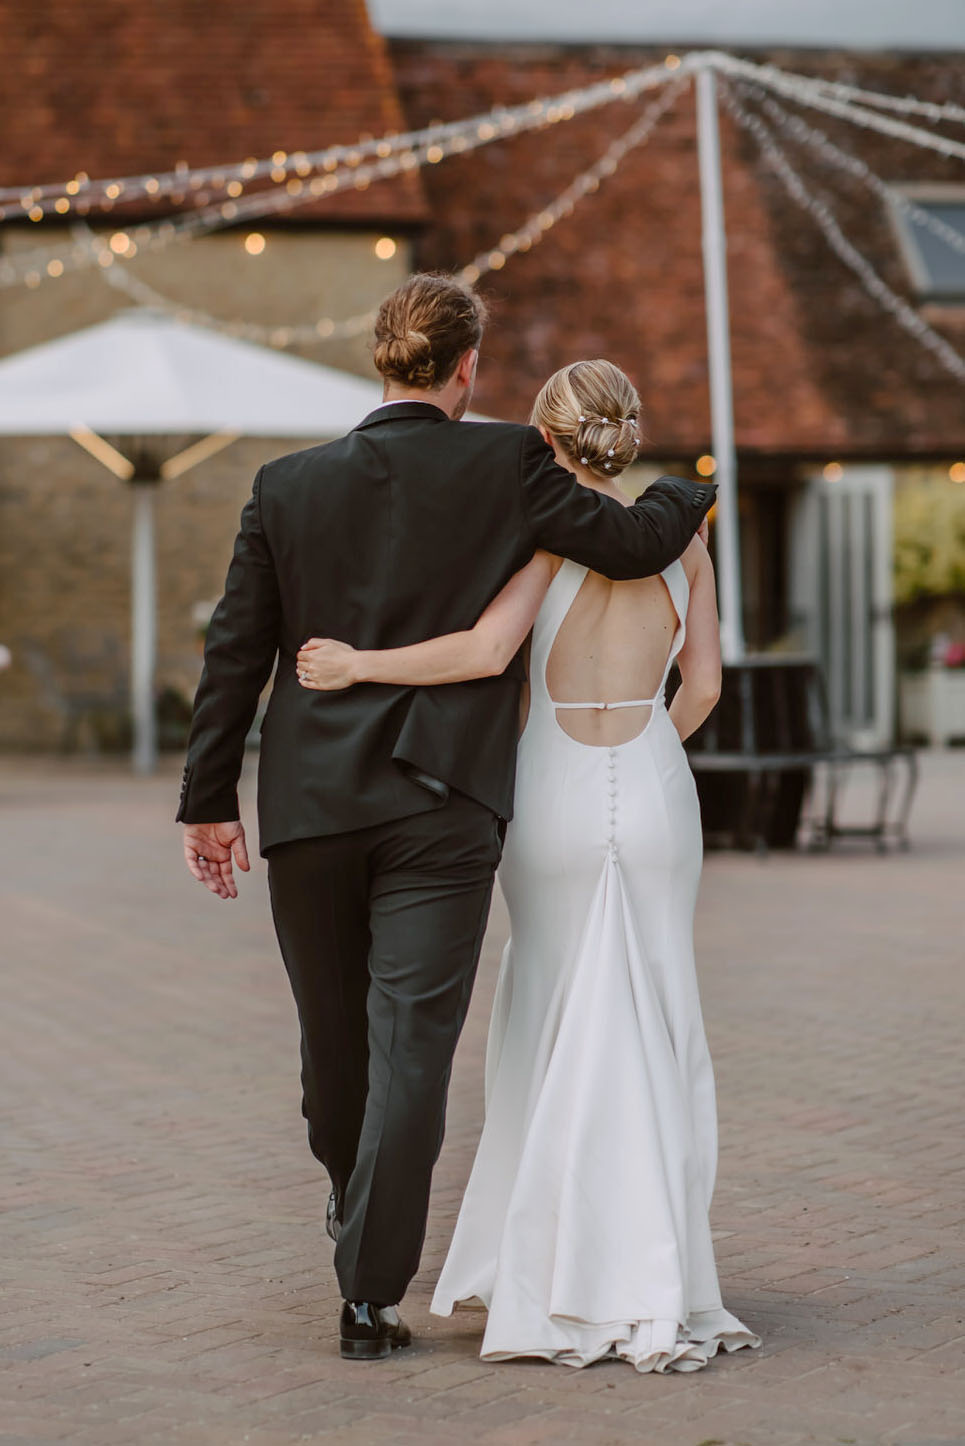 A bride and groom walking down a courtyard at a wedding Stratton Court Barn.